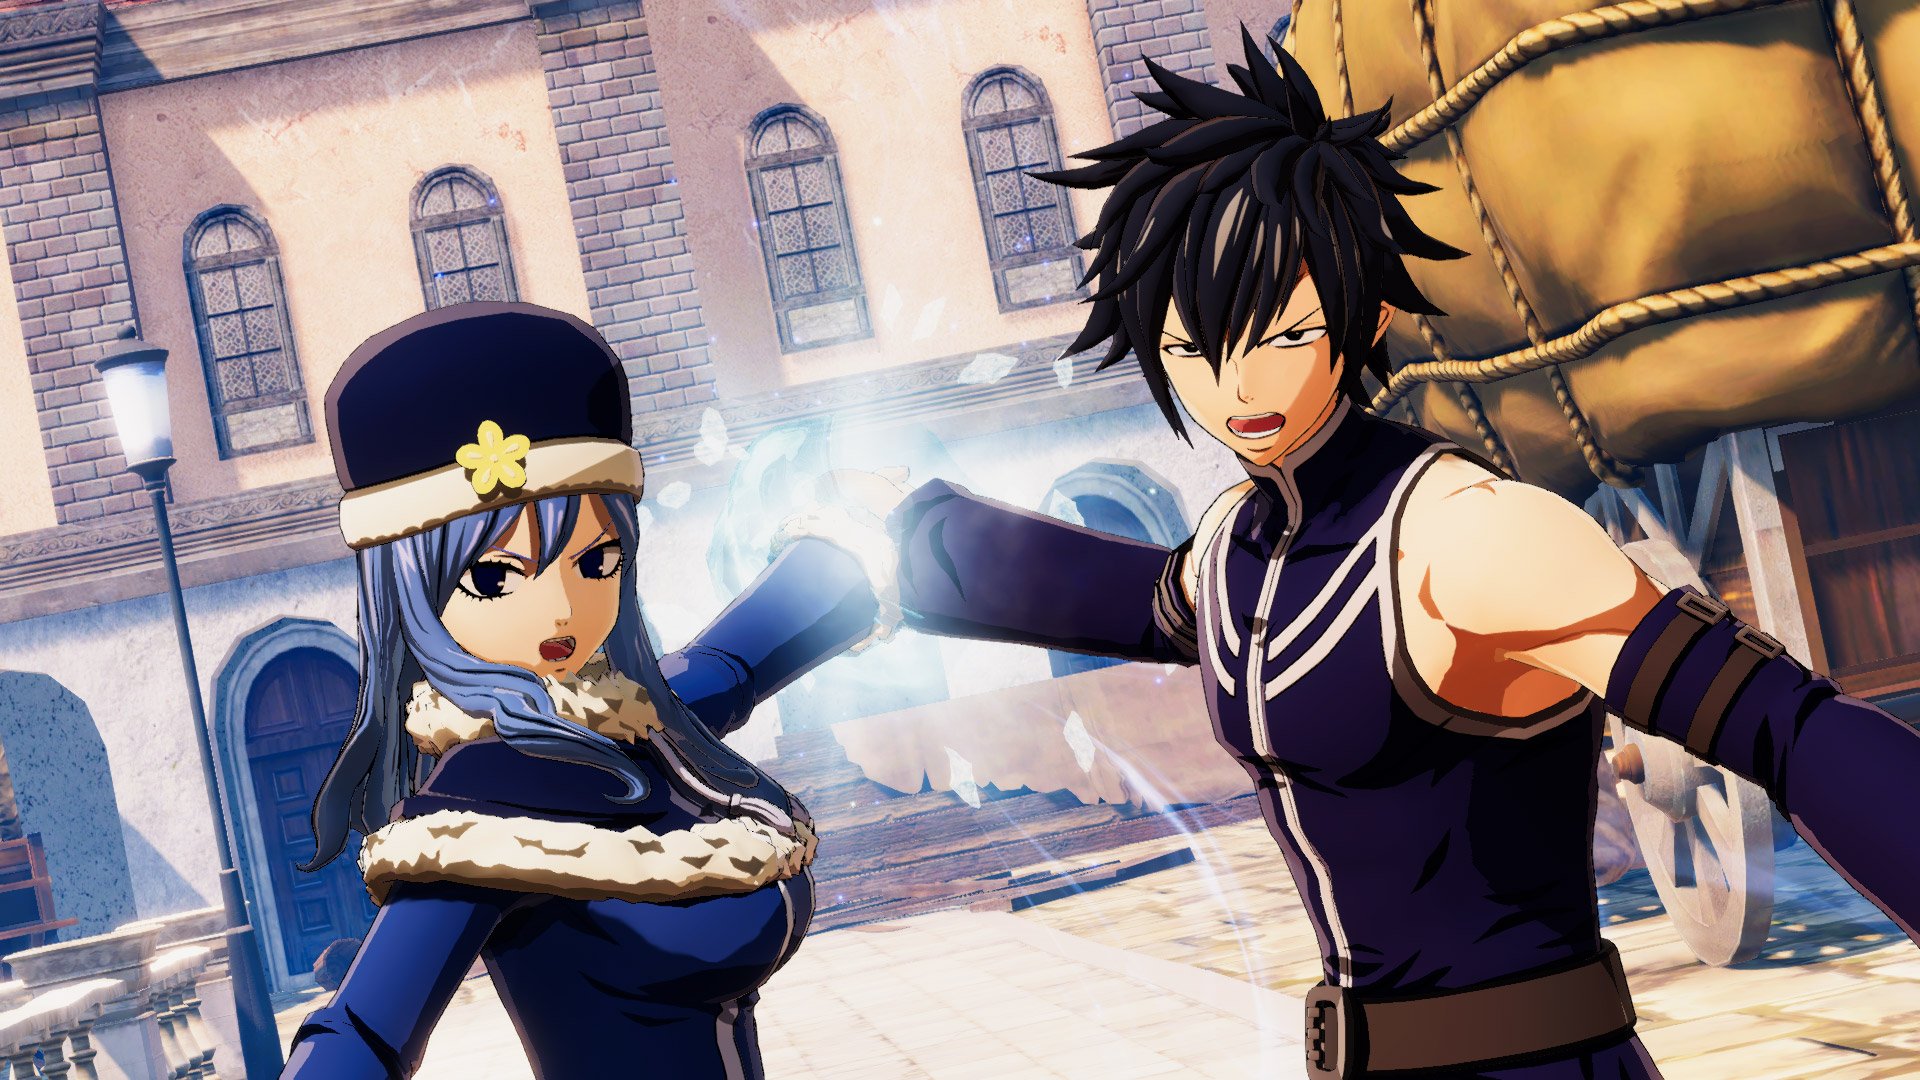 Guide Tips Fairy Tail Online Game from O4games.com